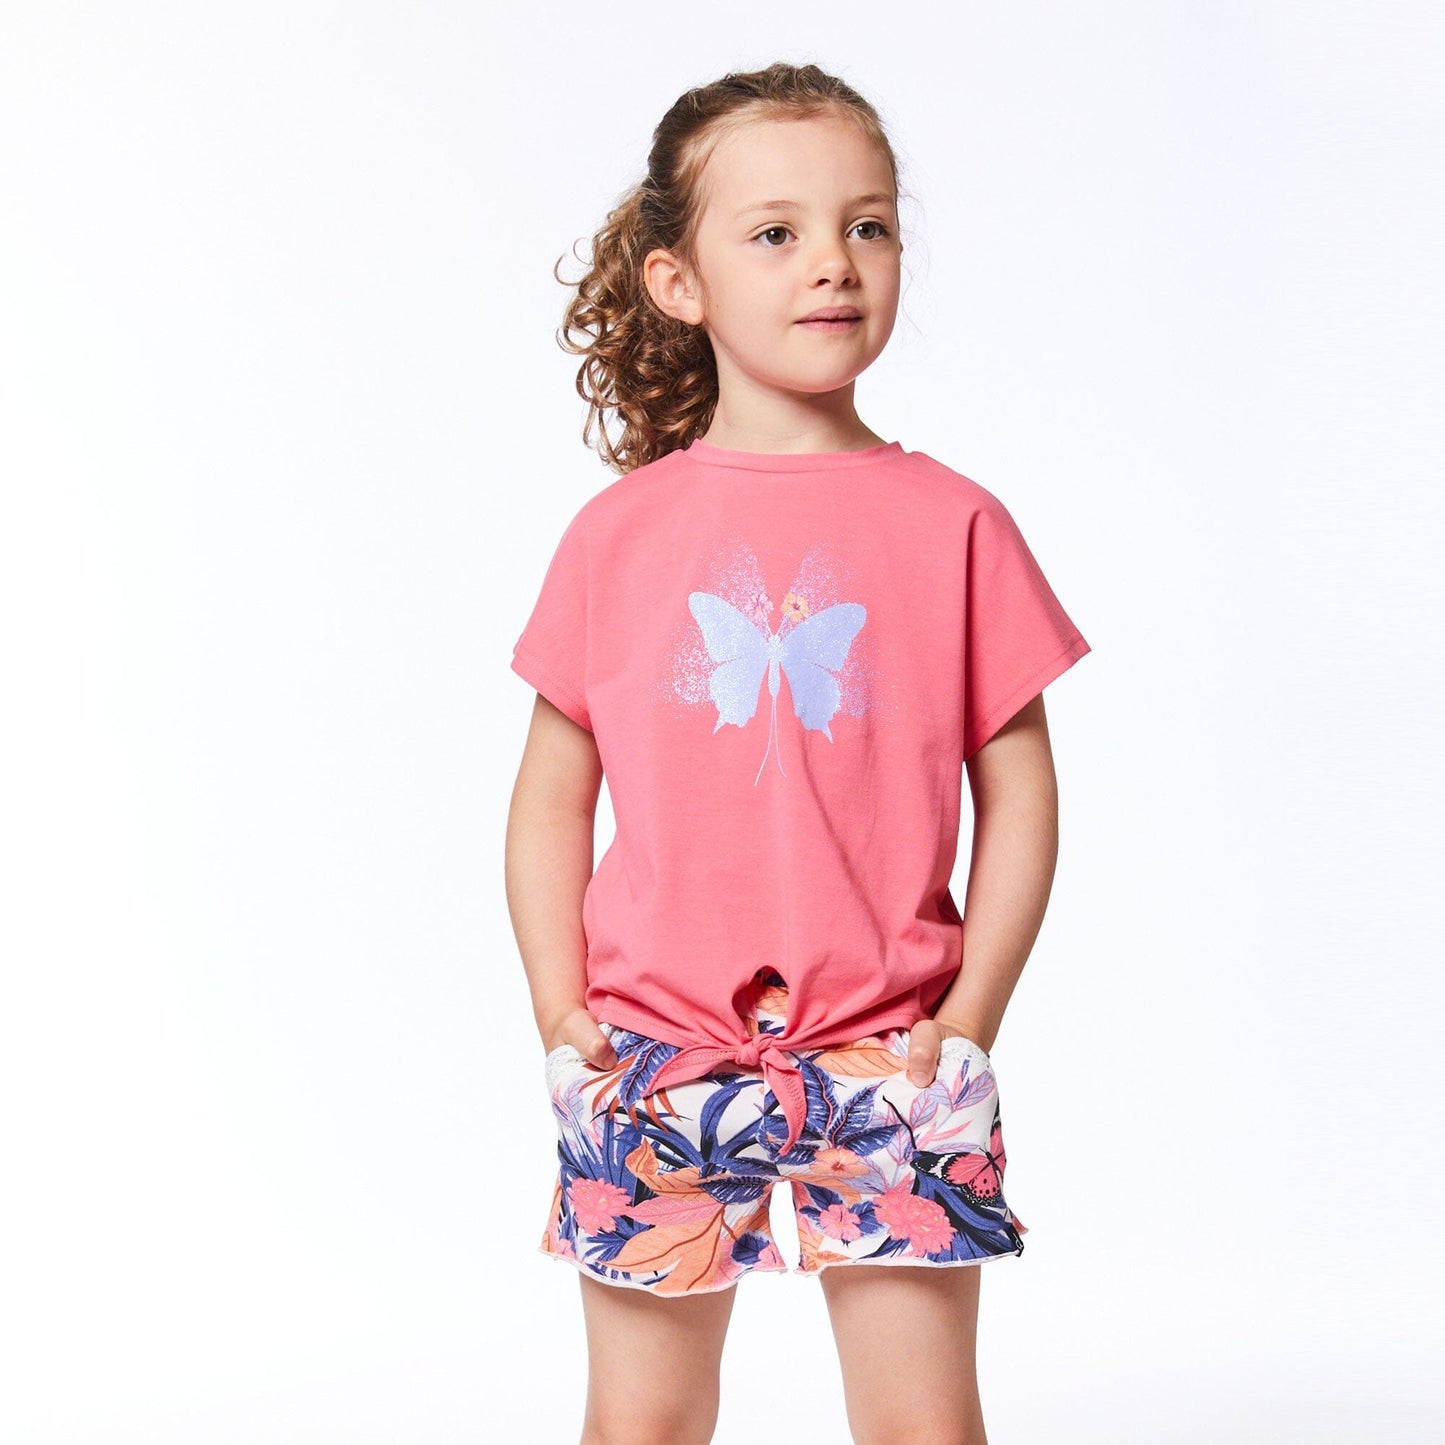 Organic Cotton Printed Short With Crochet Pink & Blue Butterfly - E30K25_054